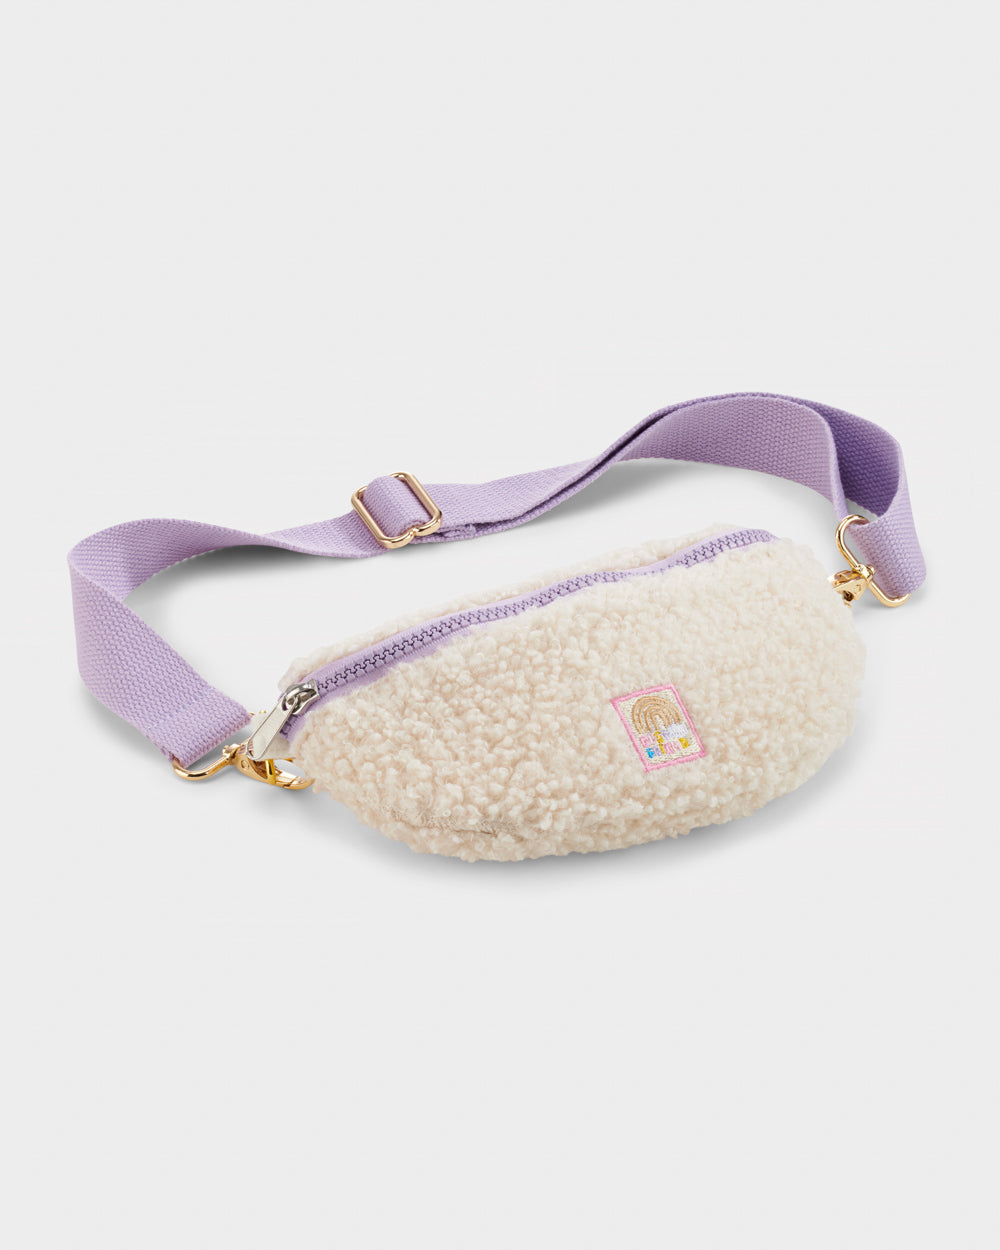 Best Friends Forever borg bum bag with adjustable lilac strap. 